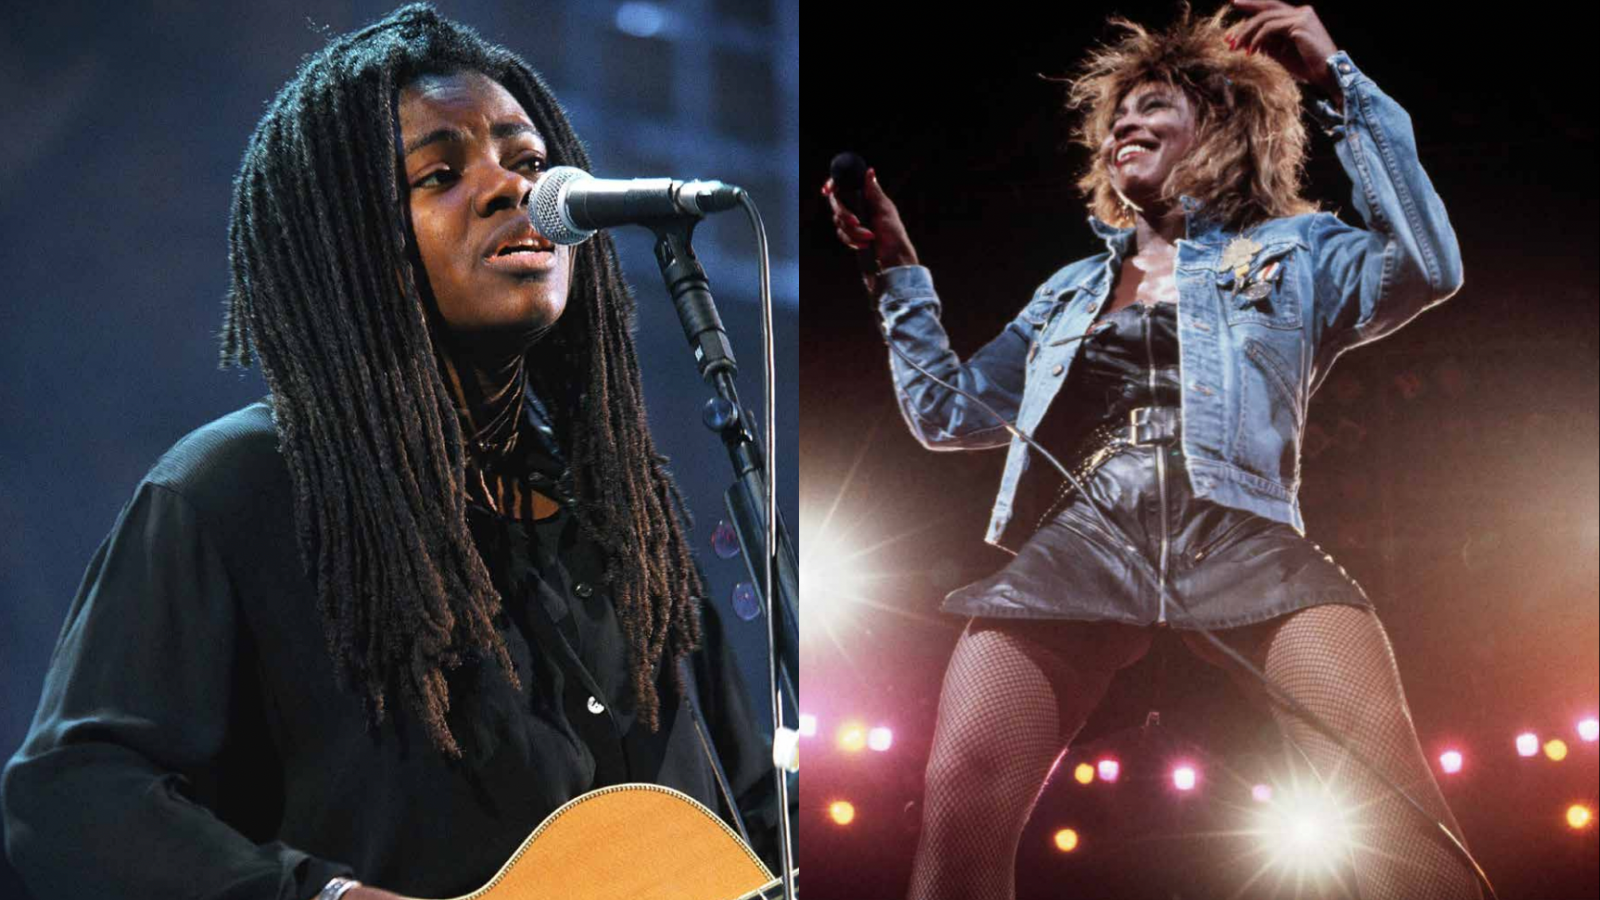 Left: singer Tracy Chapman performing with an acoustic guitar. Right: Tina Turner on stage 